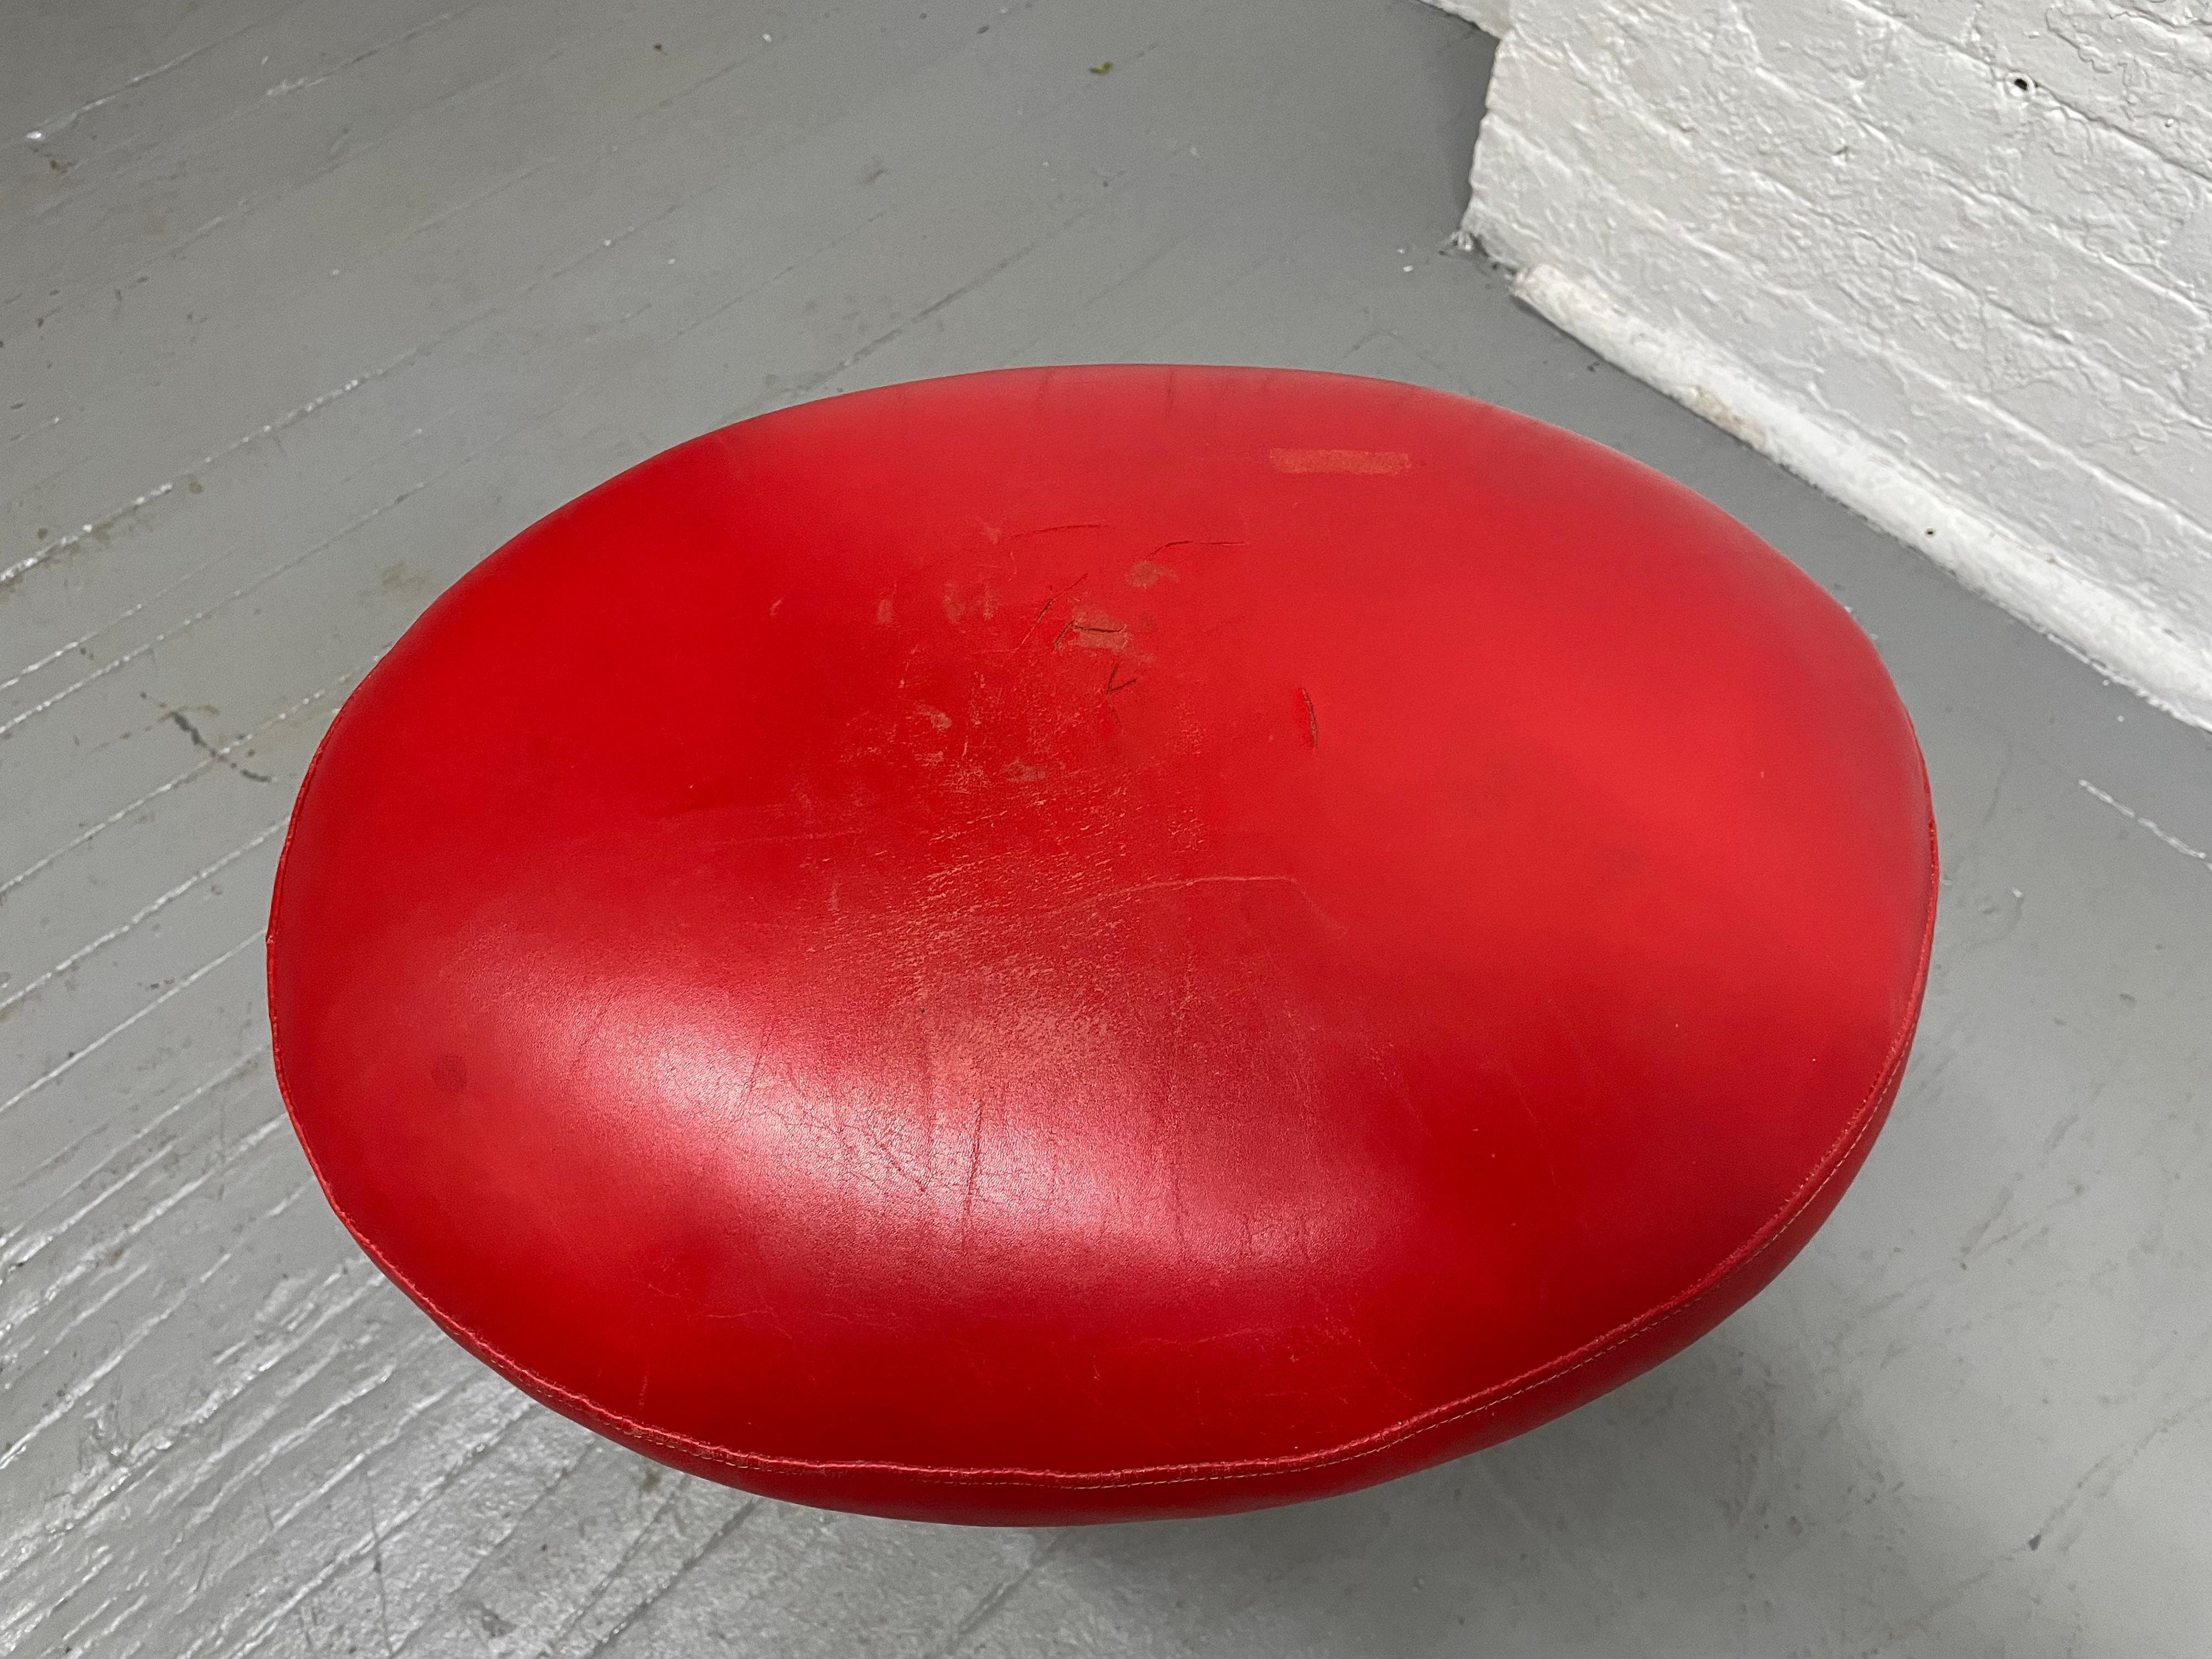 Rare, Karl Springer leather and metal stool. Has a red leather seat and metal base.